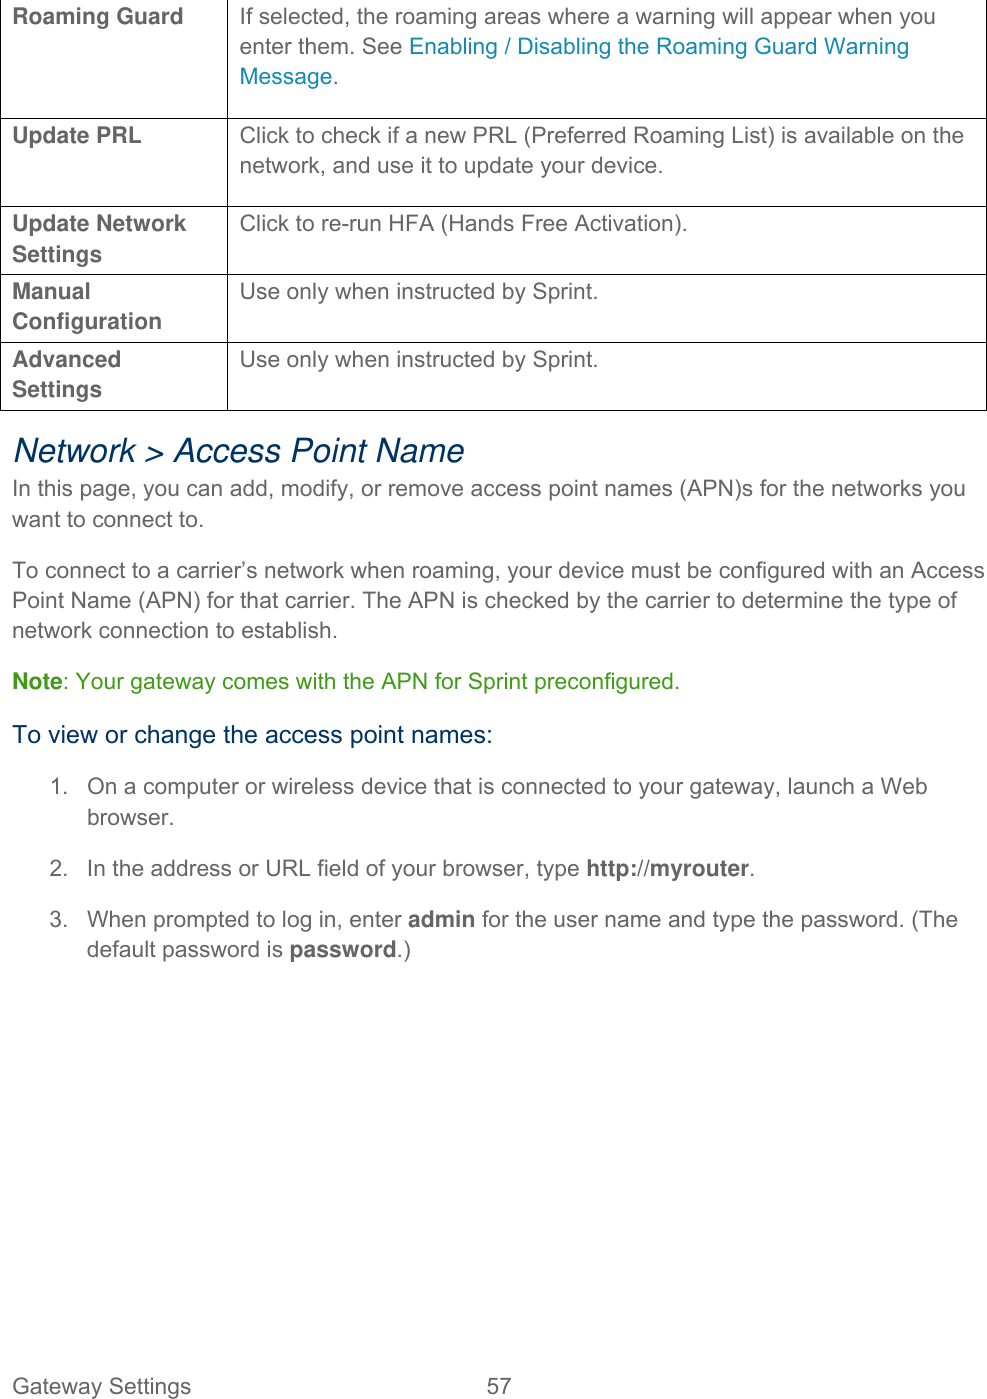 Gateway Settings  57   Roaming Guard If selected, the roaming areas where a warning will appear when you enter them. See Enabling / Disabling the Roaming Guard Warning Message. Update PRL  Click to check if a new PRL (Preferred Roaming List) is available on the network, and use it to update your device. Update Network Settings Click to re-run HFA (Hands Free Activation). Manual Configuration Use only when instructed by Sprint. Advanced Settings Use only when instructed by Sprint. Network &gt; Access Point Name In this page, you can add, modify, or remove access point names (APN)s for the networks you want to connect to. To connect to a carrier’s network when roaming, your device must be configured with an Access Point Name (APN) for that carrier. The APN is checked by the carrier to determine the type of network connection to establish. Note: Your gateway comes with the APN for Sprint preconfigured. To view or change the access point names: 1.  On a computer or wireless device that is connected to your gateway, launch a Web browser. 2.  In the address or URL field of your browser, type http://myrouter.  3.  When prompted to log in, enter admin for the user name and type the password. (The default password is password.) 